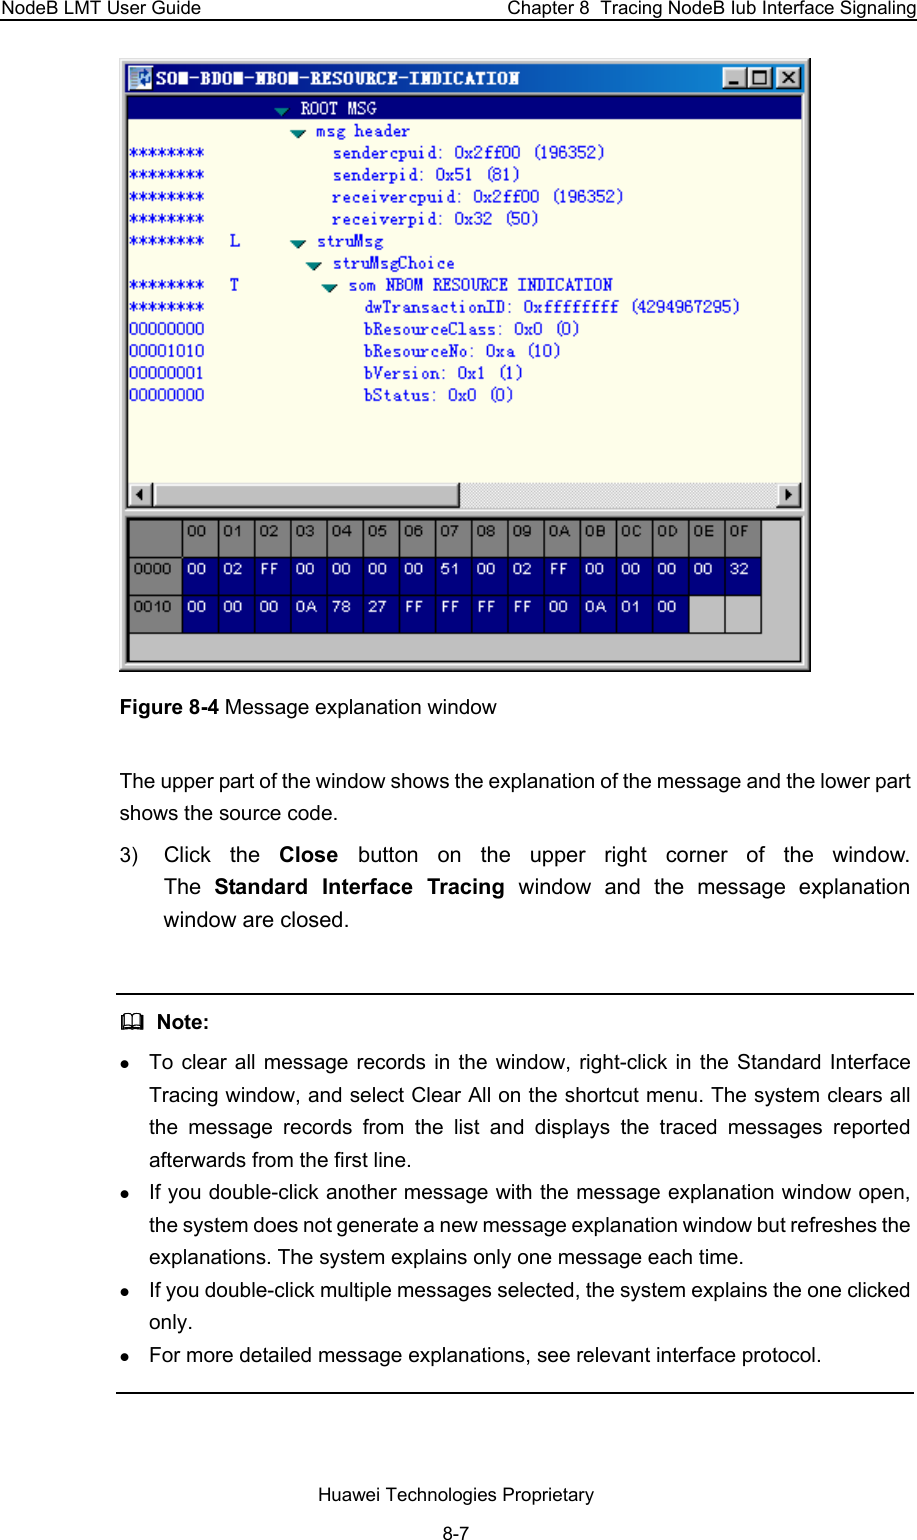 NodeB LMT User Guide  Chapter 8  Tracing NodeB Iub Interface Signaling  Figure 8-4 Message explanation window The upper part of the window shows the explanation of the message and the lower part shows the source code.  3)  Click the Close  button on the upper right corner of the window.  The  Standard Interface Tracing window and the message explanation window are closed.    Note: z To clear all message records in the window, right-click in the Standard Interface Tracing window, and select Clear All on the shortcut menu. The system clears all the message records from the list and displays the traced messages reported afterwards from the first line. z If you double-click another message with the message explanation window open, the system does not generate a new message explanation window but refreshes the explanations. The system explains only one message each time.  z If you double-click multiple messages selected, the system explains the one clicked only.  z For more detailed message explanations, see relevant interface protocol.   Huawei Technologies Proprietary 8-7 